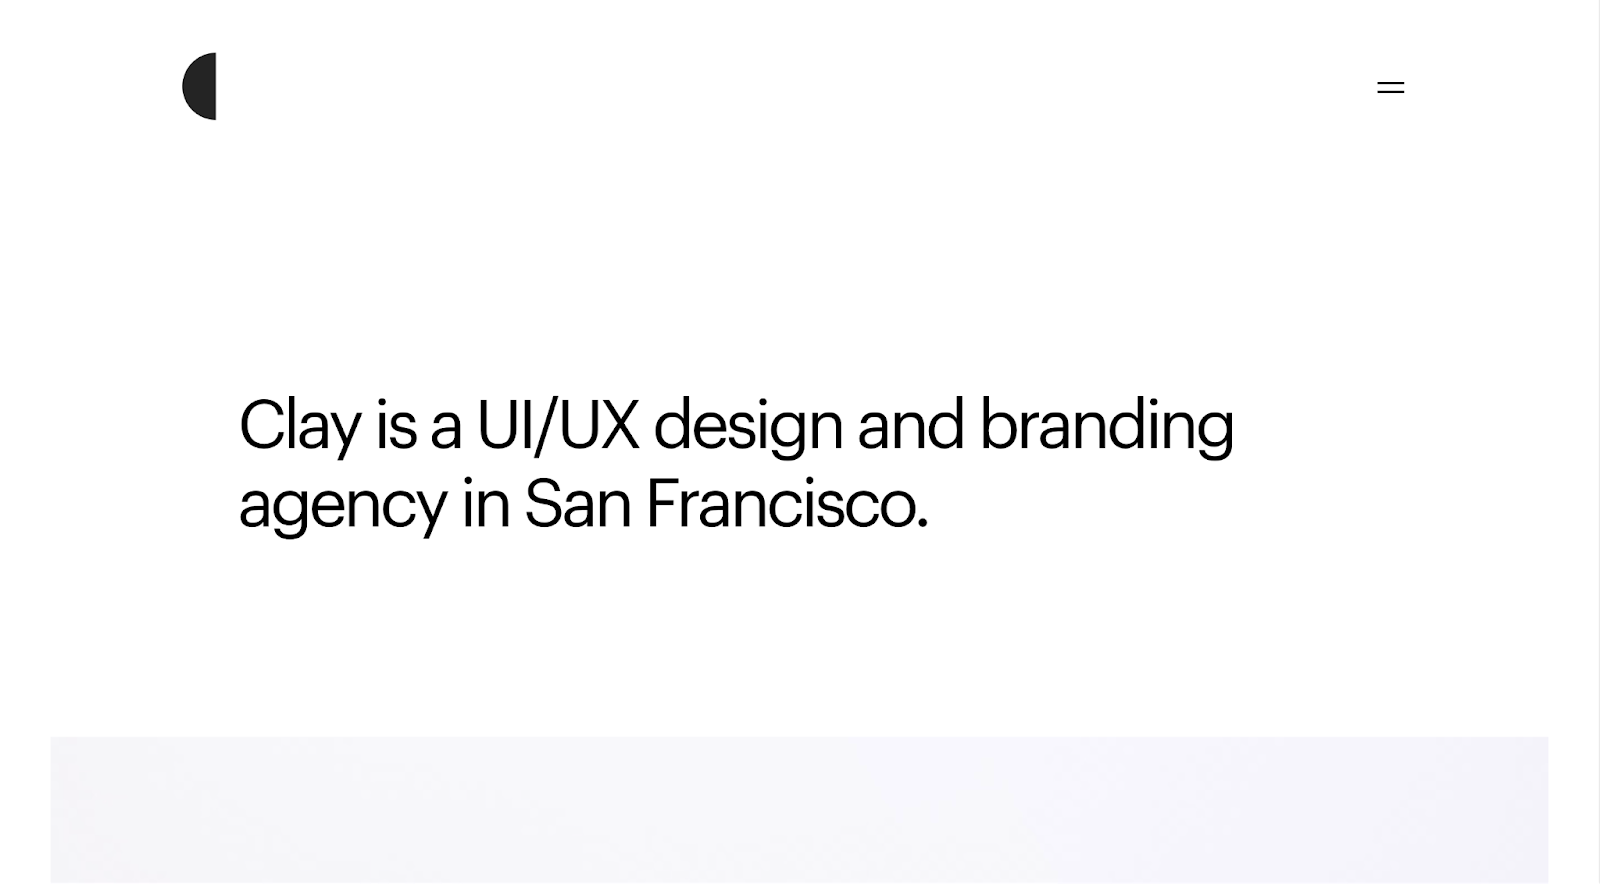 Clay is a San Francisco-based UI/UX design and branding firm.